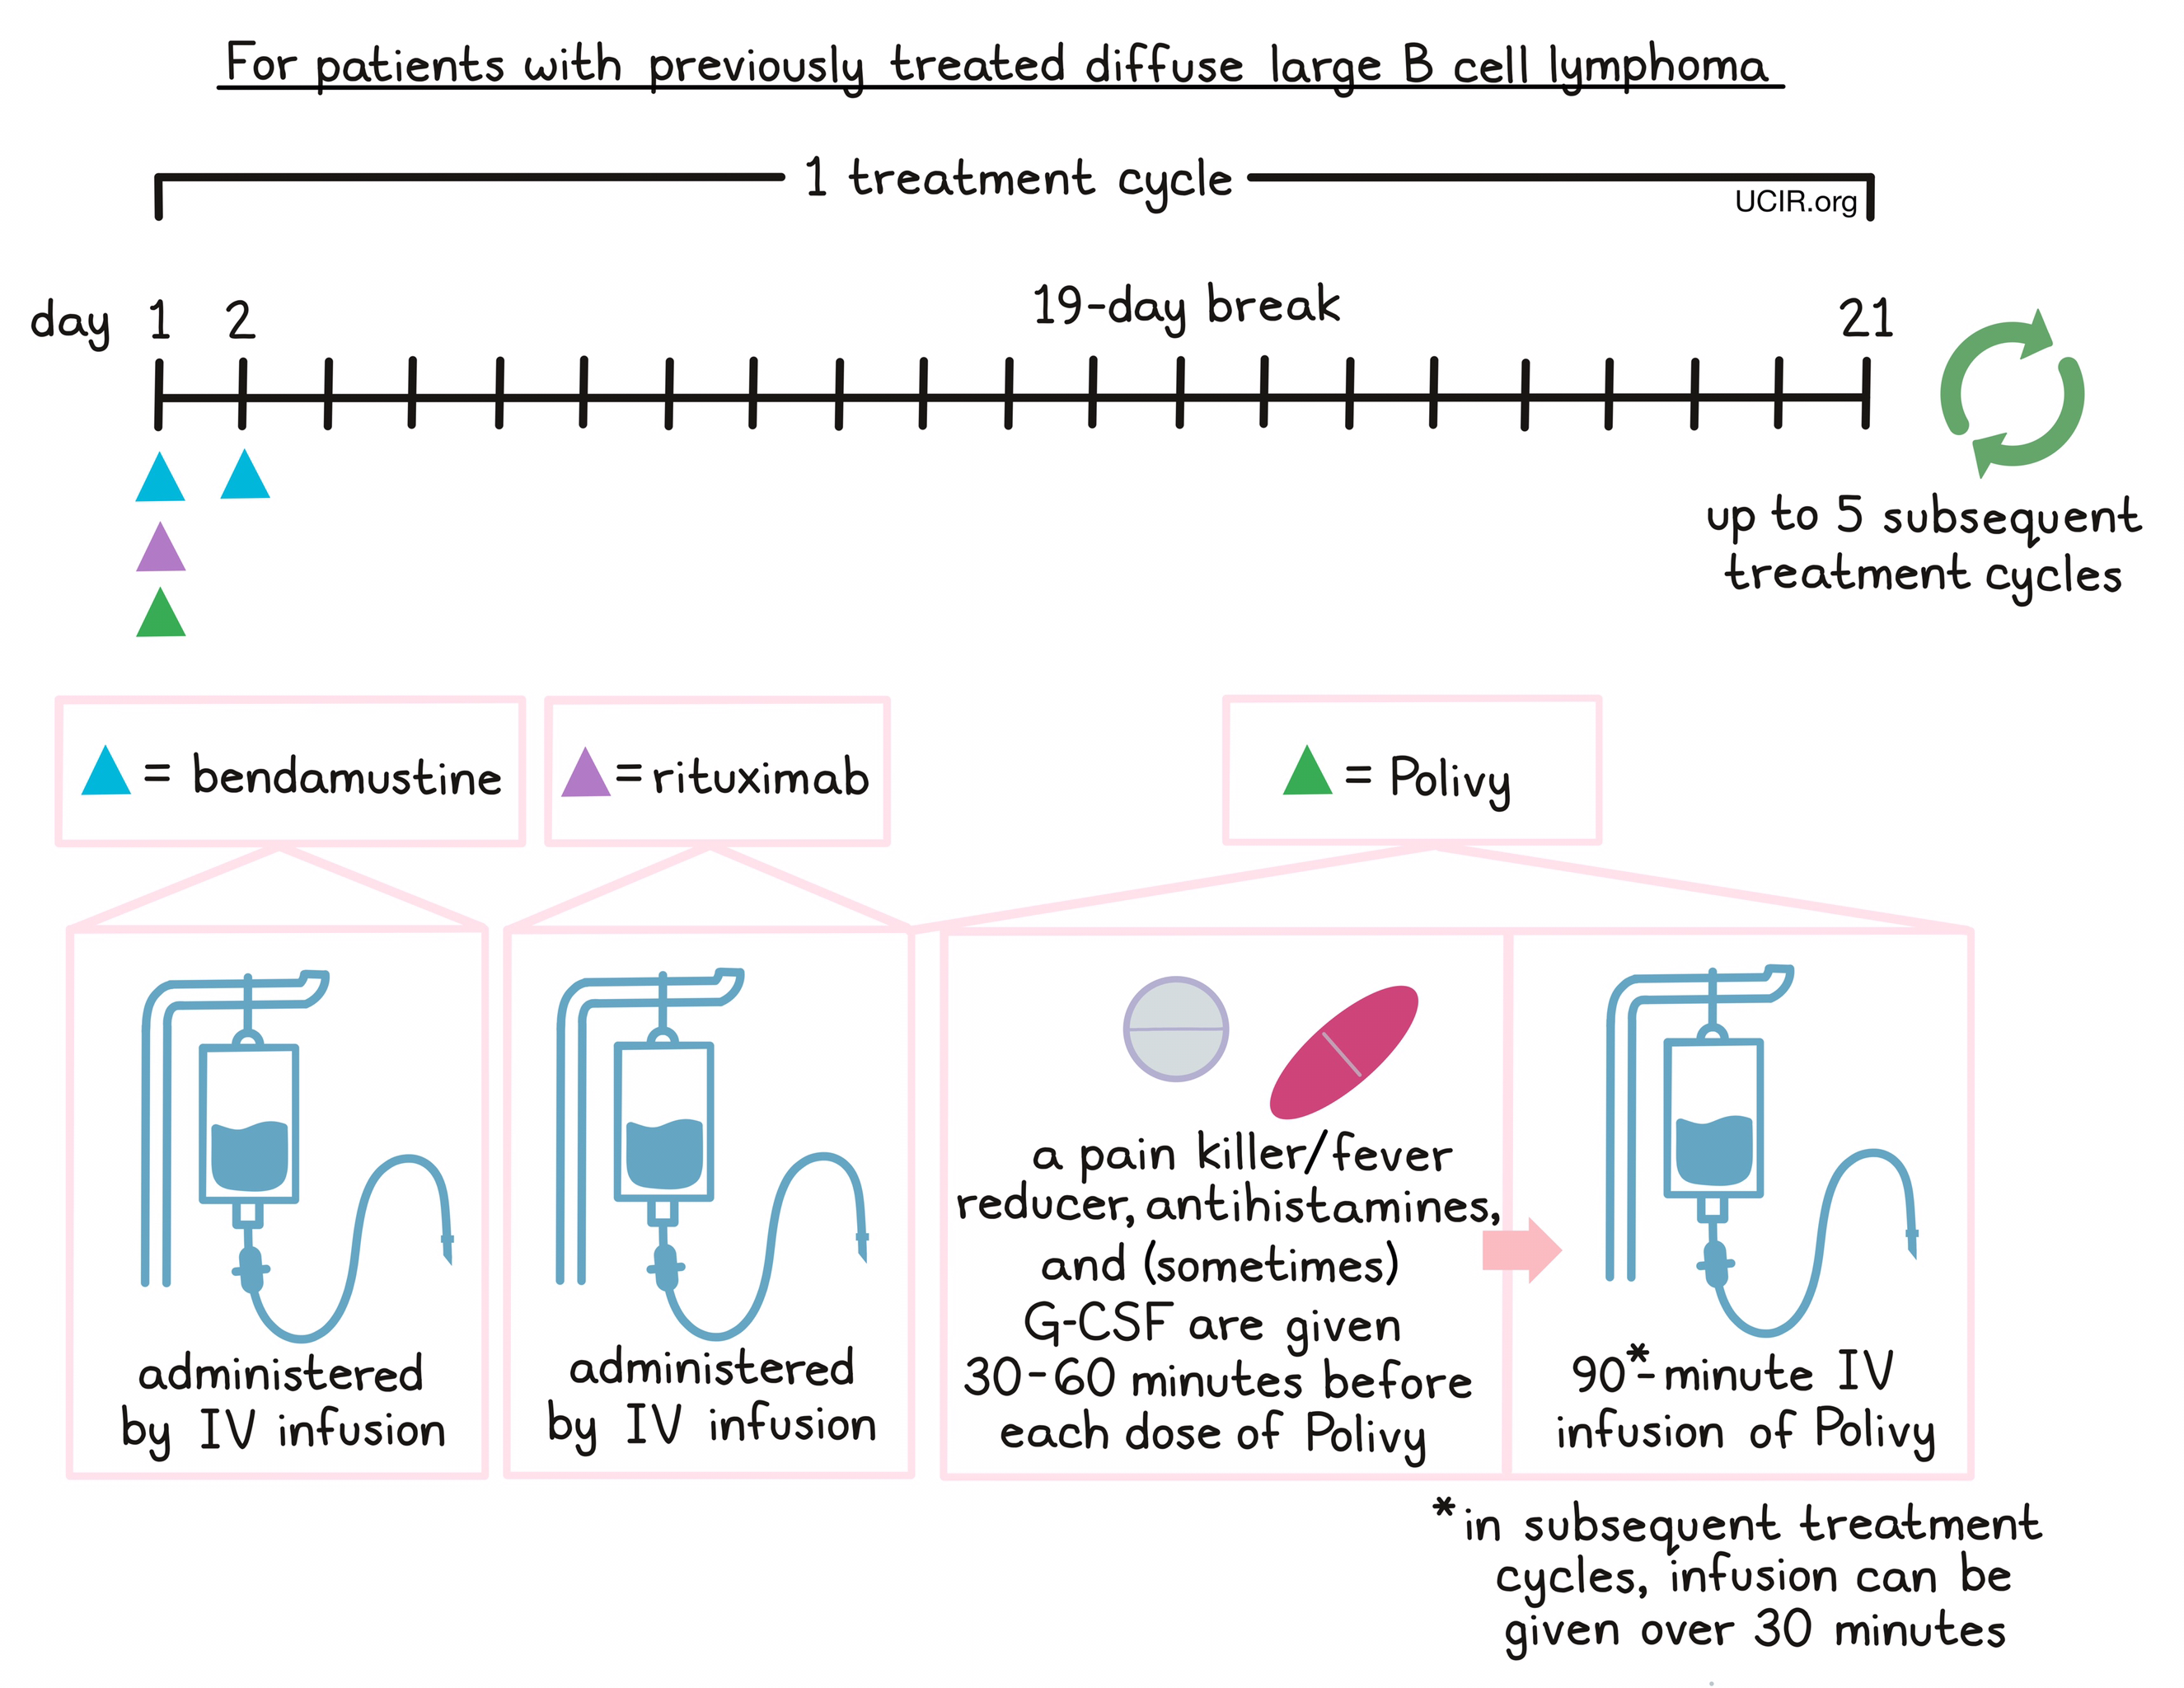 Illustration showing how Polivy is administered to patients with previously treated diffuse large B cell lymphoma